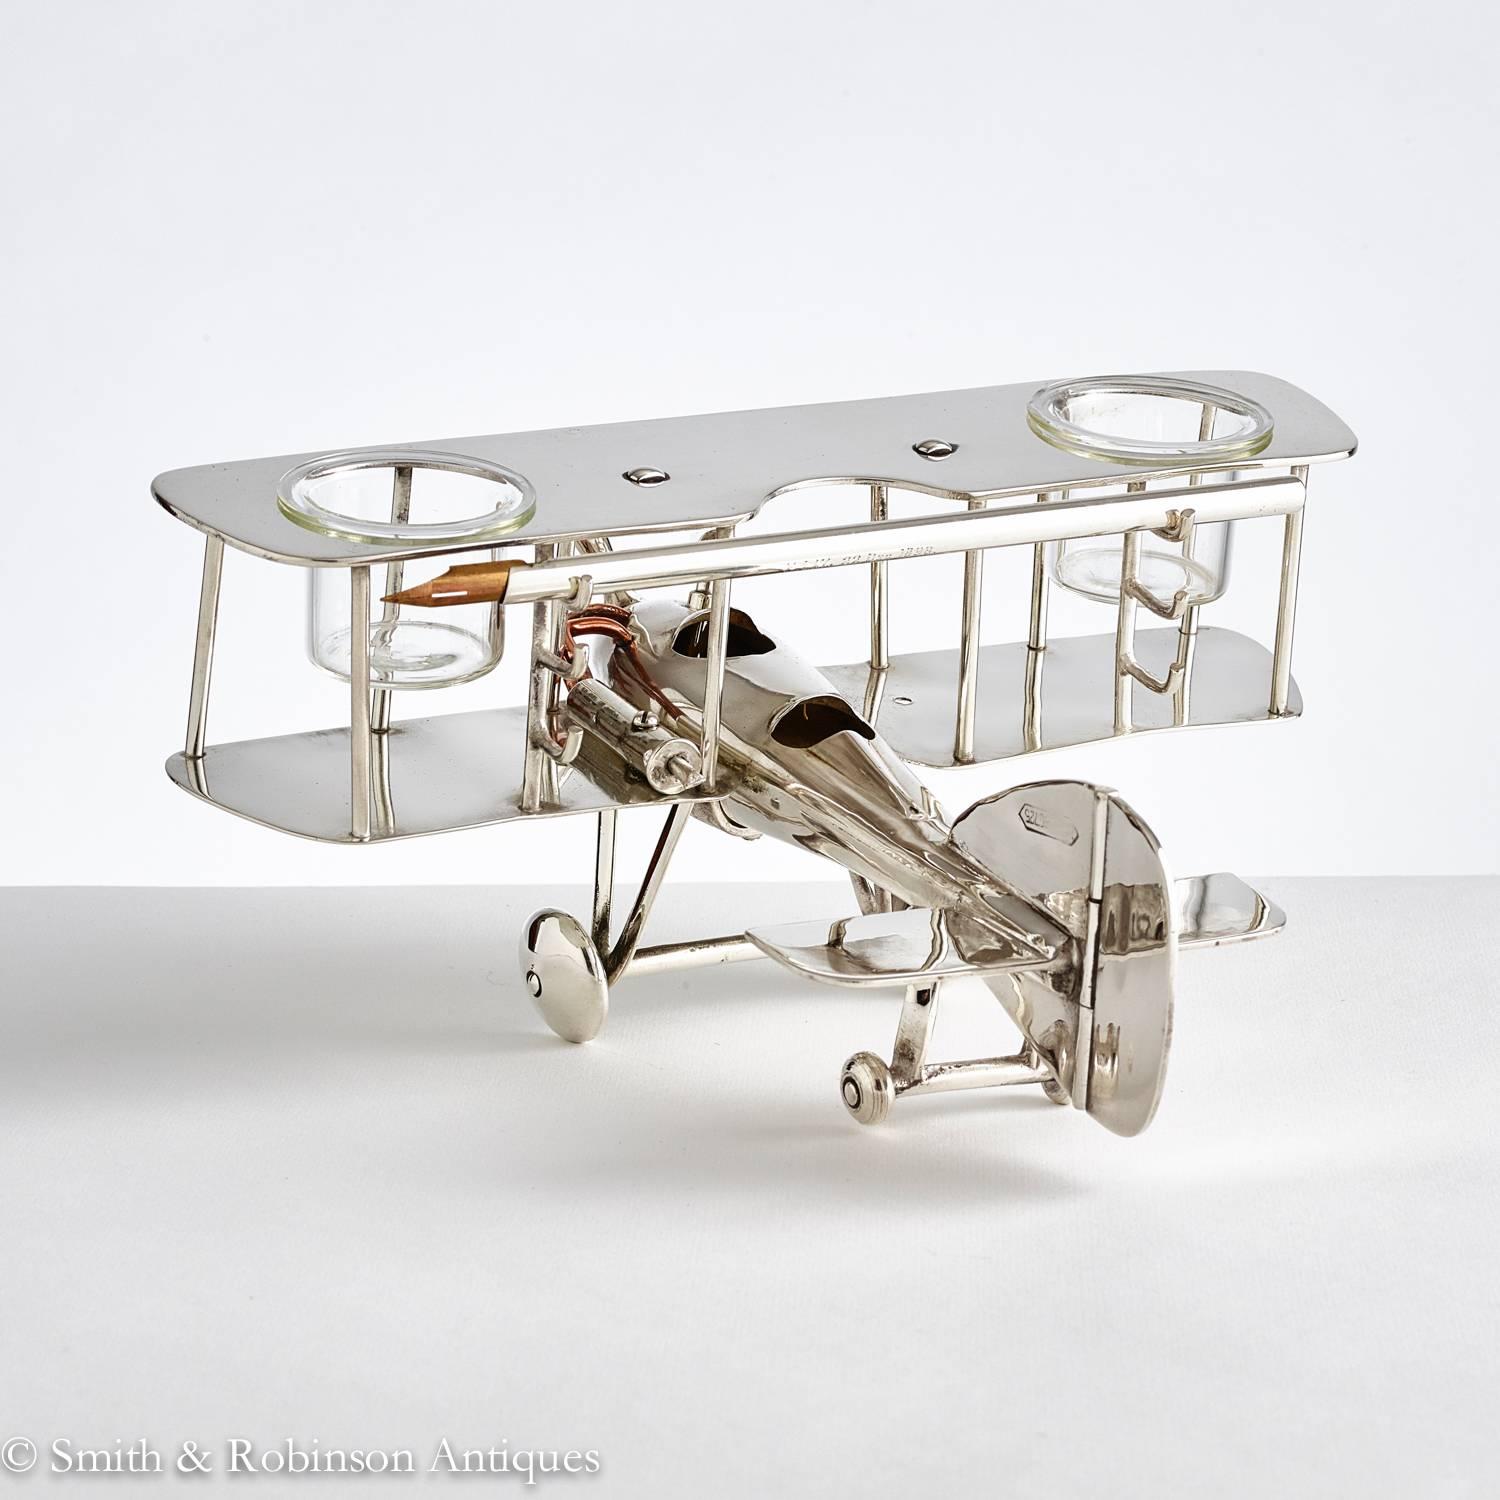 A very unusual desk piece in the form of a WW1 bi-plane, English, circa 1920.
The wings accommodate two glass inkwells. On the reverse of the wings there are three penholders, such as the one shown in the images.
Notably the engine has good